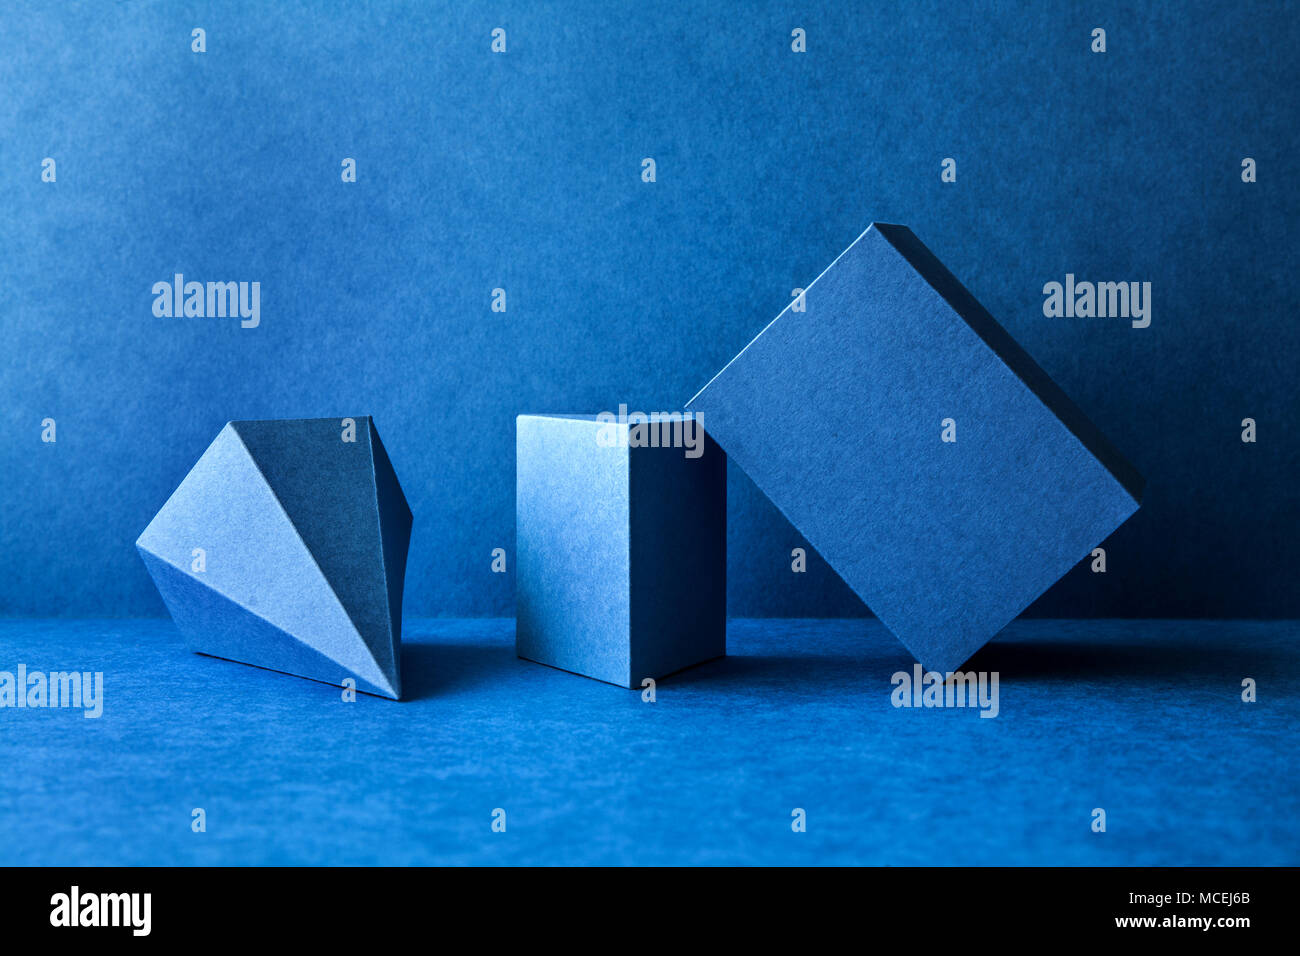 Geometrical figures still life composition. Three-dimensional prism pyramid tetrahedron rectangular cube objects on blue background. Platonic solids figures, simplicity concept photography. Stock Photo